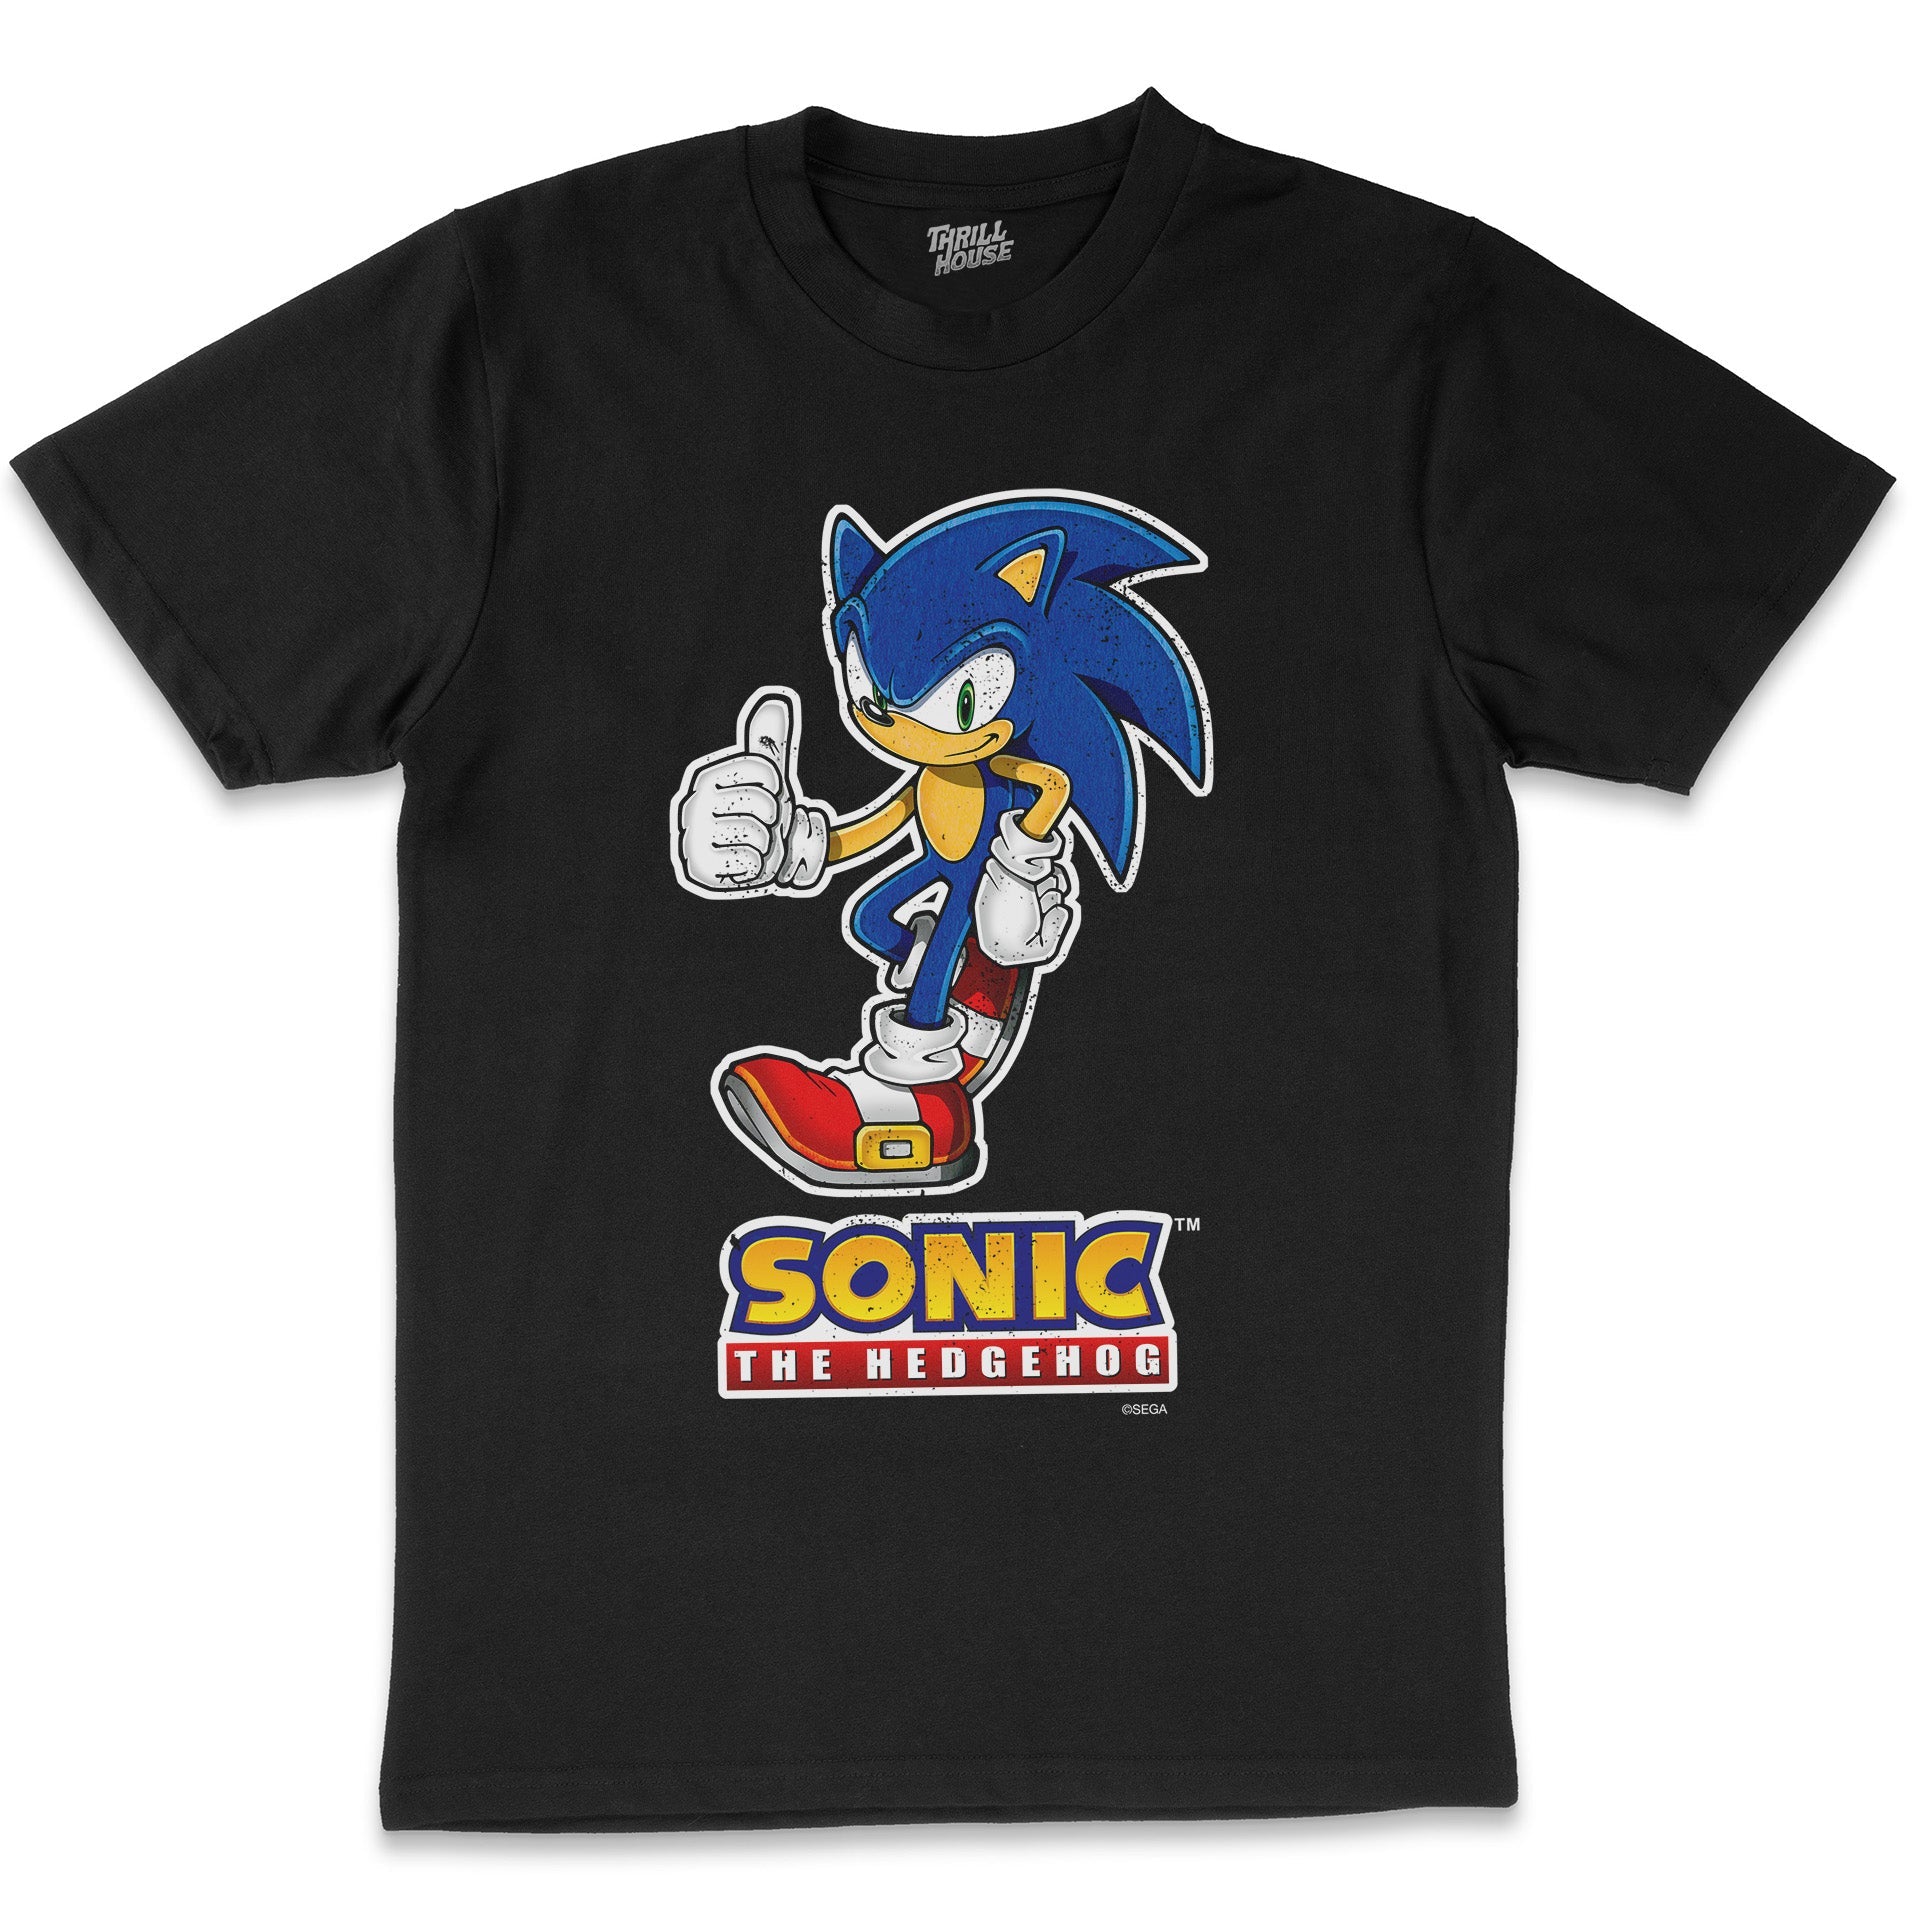 Sonic The Hedgehog 90s Video Game Cartridge Console Officially Licensed Geek Nerd SEGA T-Shirt